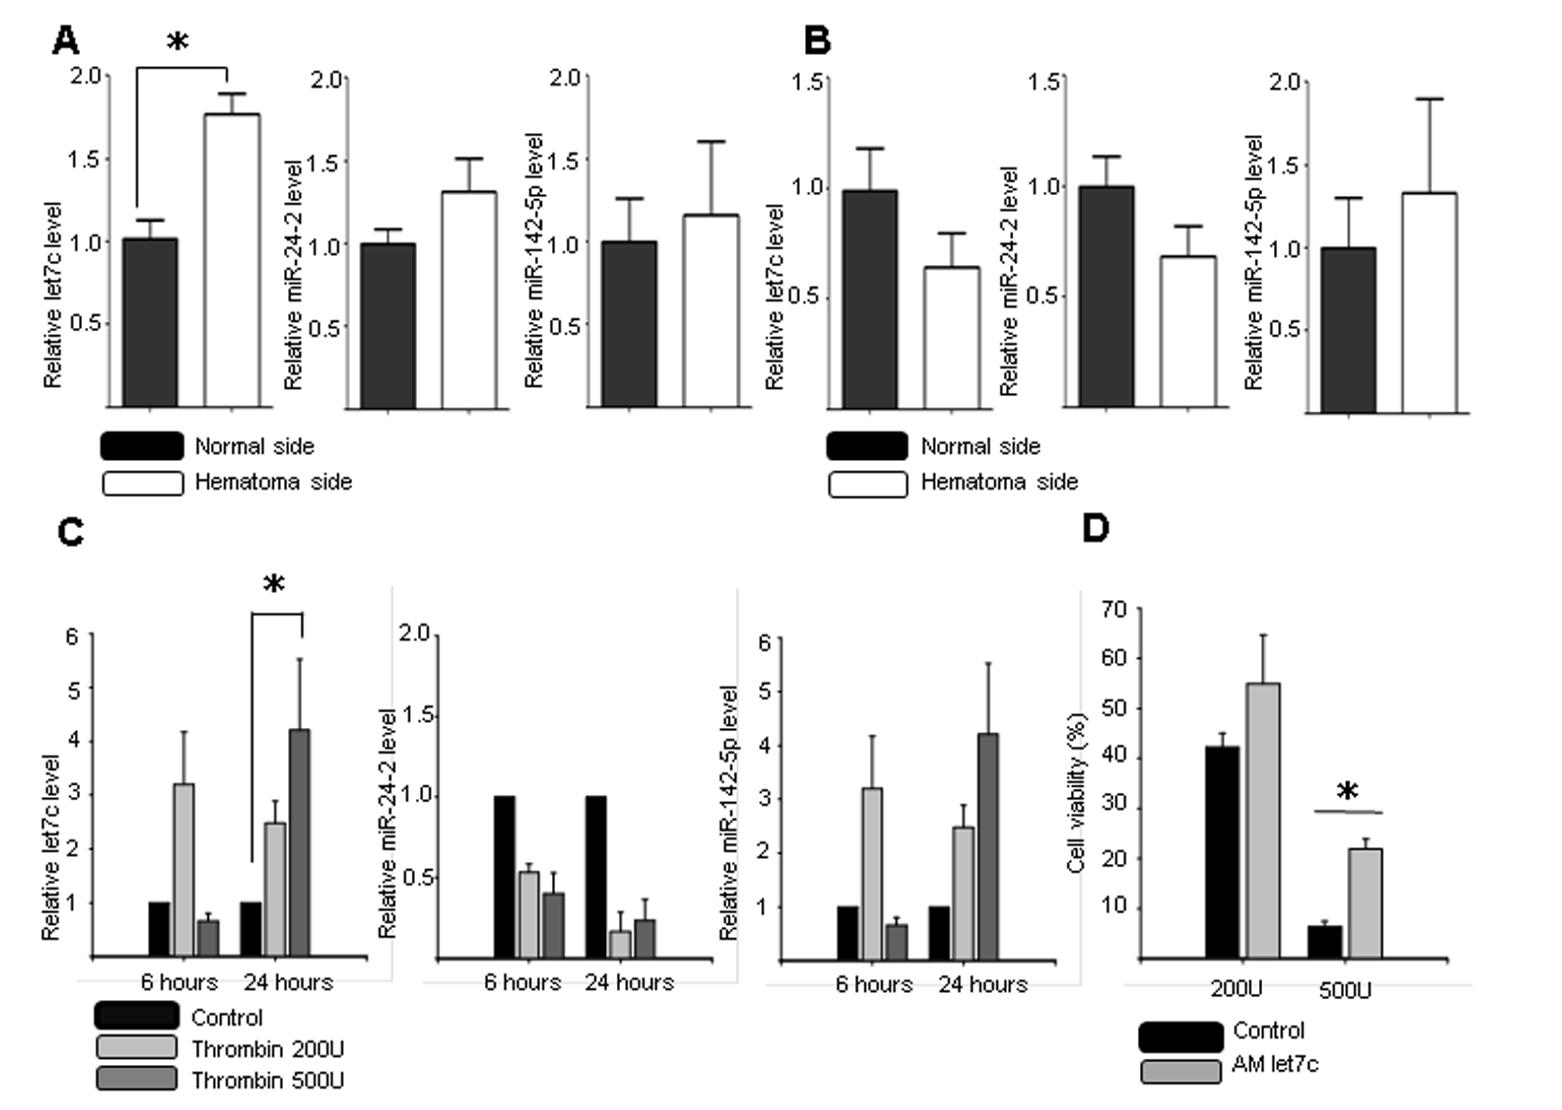 The microRNA expression in blood injection model, saline injection model, and in vitro thrombin injury model. The level of let7c increased after blood injection on the same coordinate as collagenase (p = 0.0159) (A), but not after normal saline injection (p = 0.0937) (B). The in vitro thrombin injury model showed that let7c increased 24 hours after the 500 U thrombin injury (C). The let7c antagomir (AM) increased cell survival from the thrombin injury (6.3861.09% vs. 21.8962.01%, p = 0.037) (D). *P,0.05, n = 5–6 per group